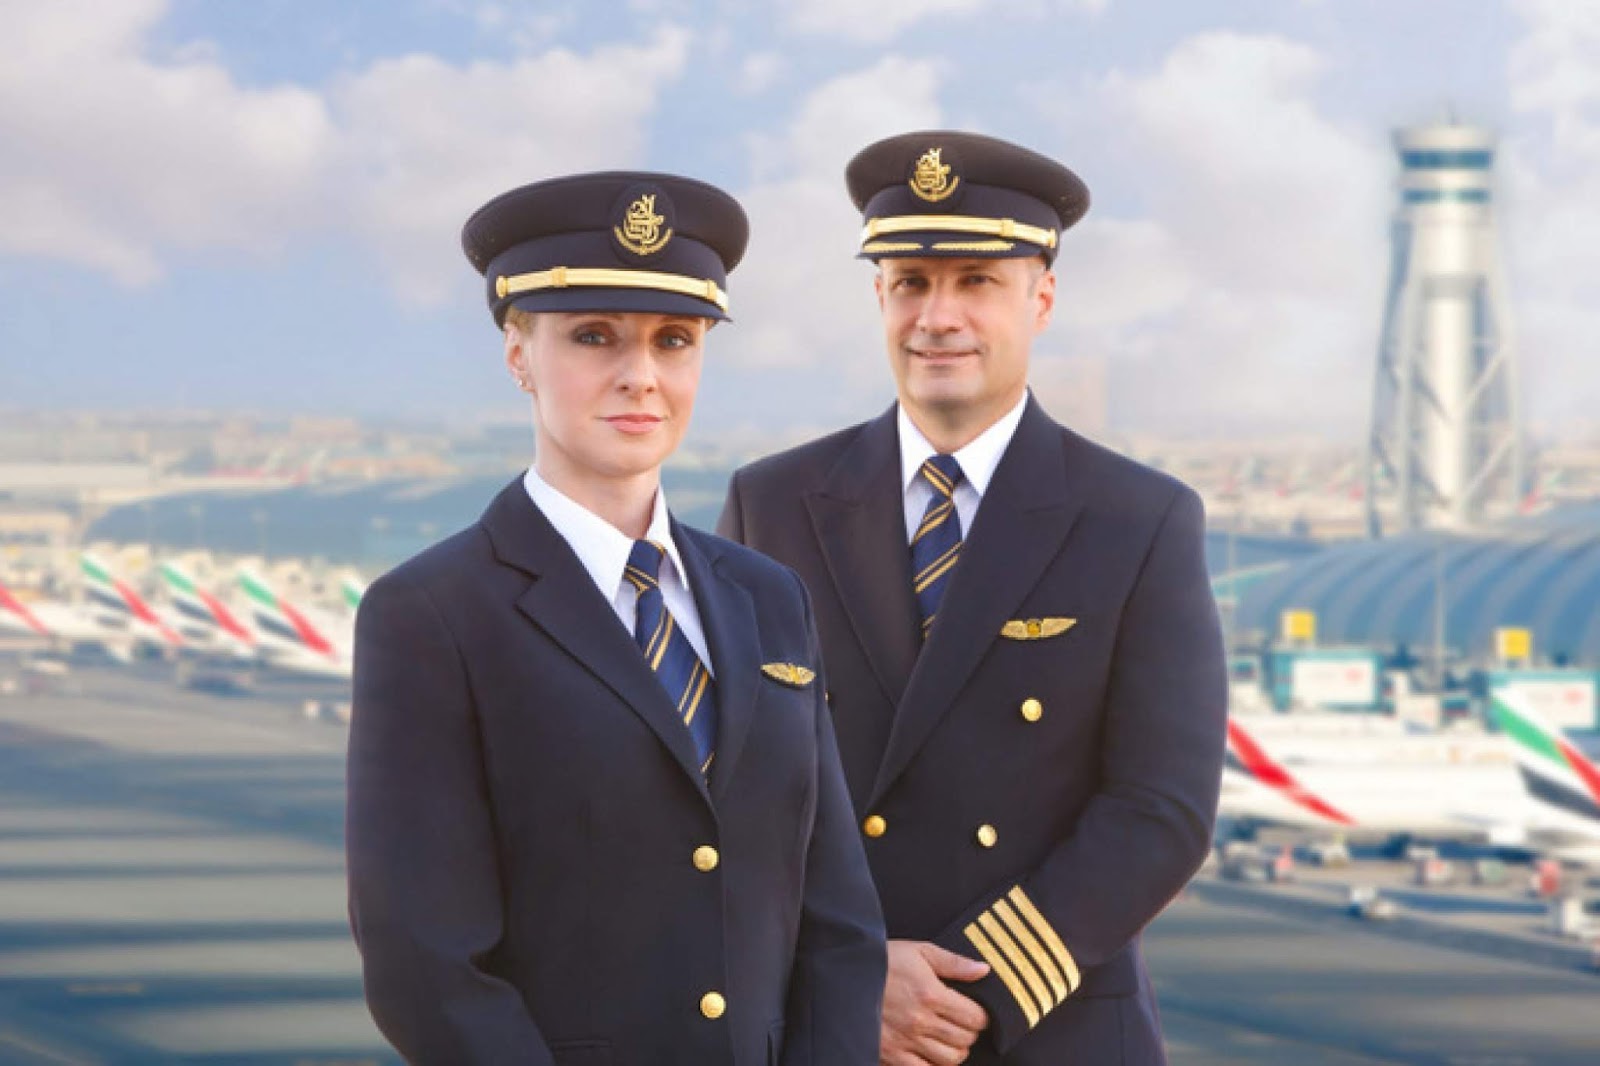 fly-gosh-emirates-pilot-recruitment-direct-entry-first-officer-captains-rated-non-rated